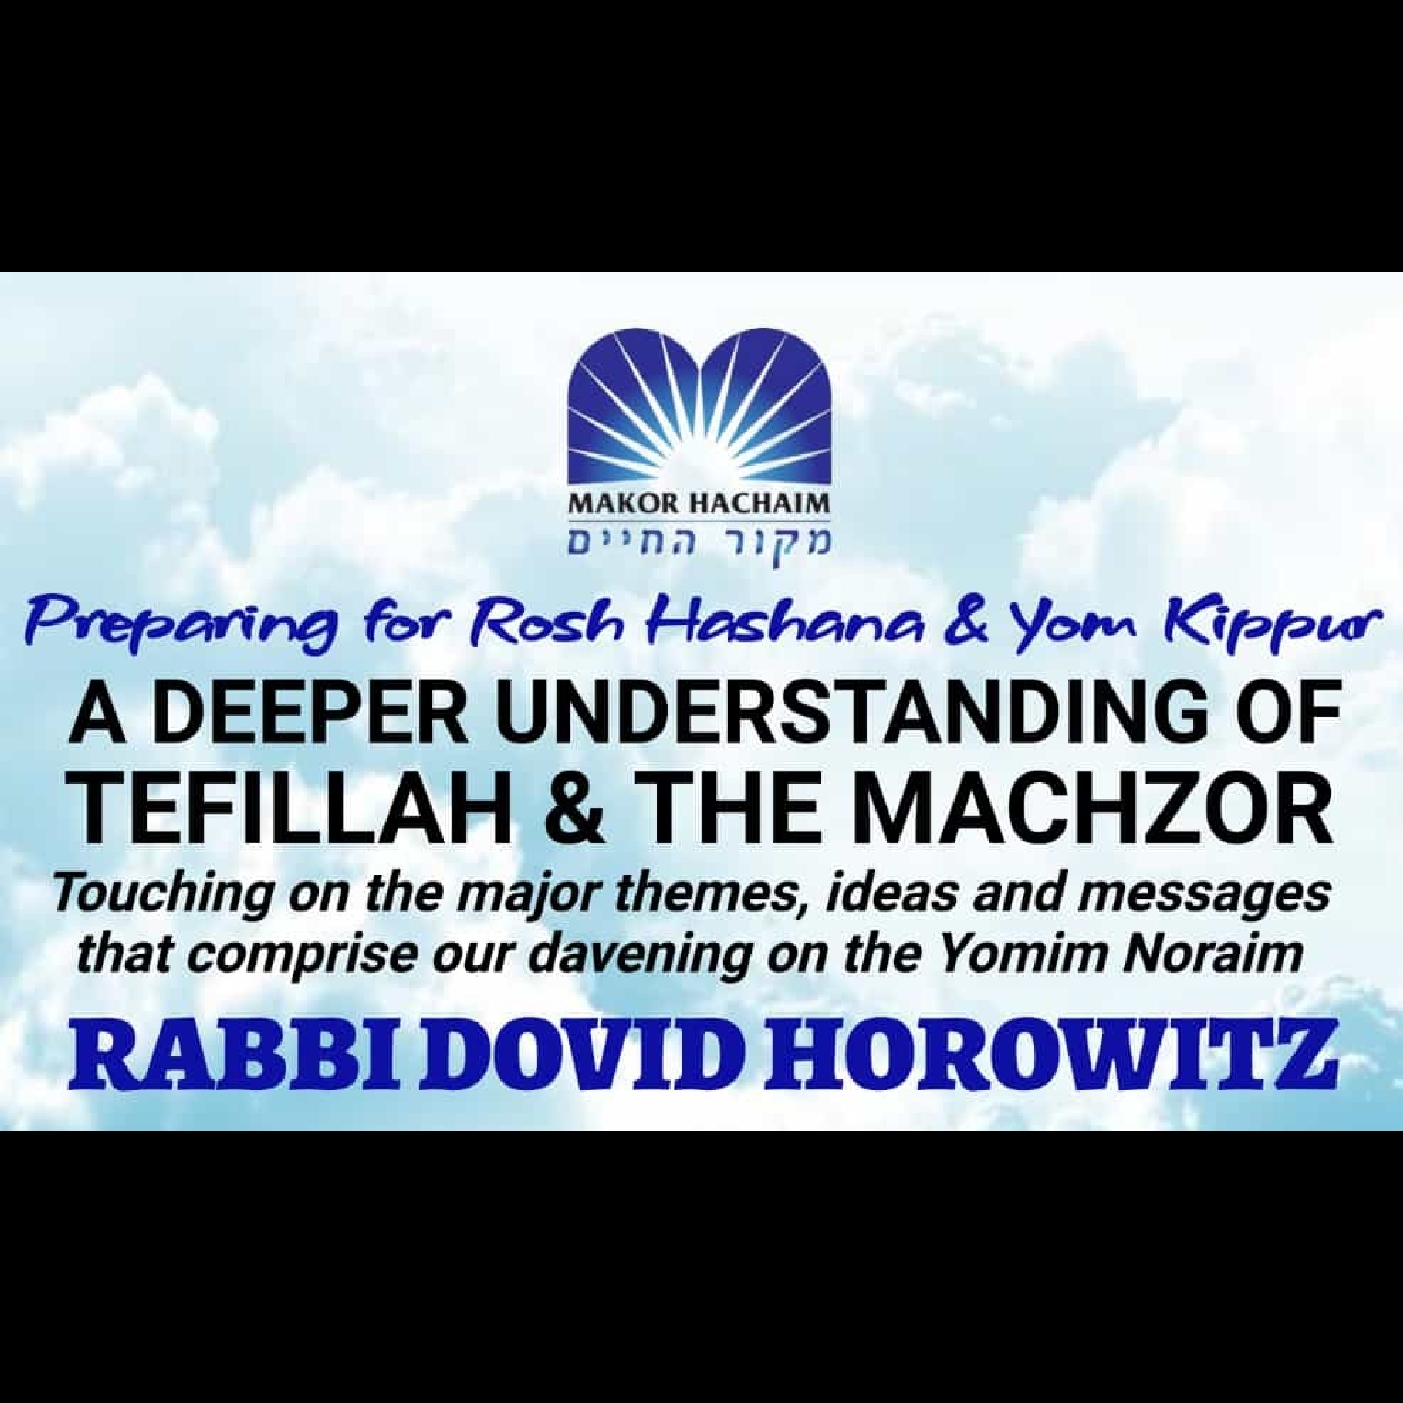 THE MACHZOR #1 Why Do We Need to Spend So Much Time Davening on Rosh Hashana?